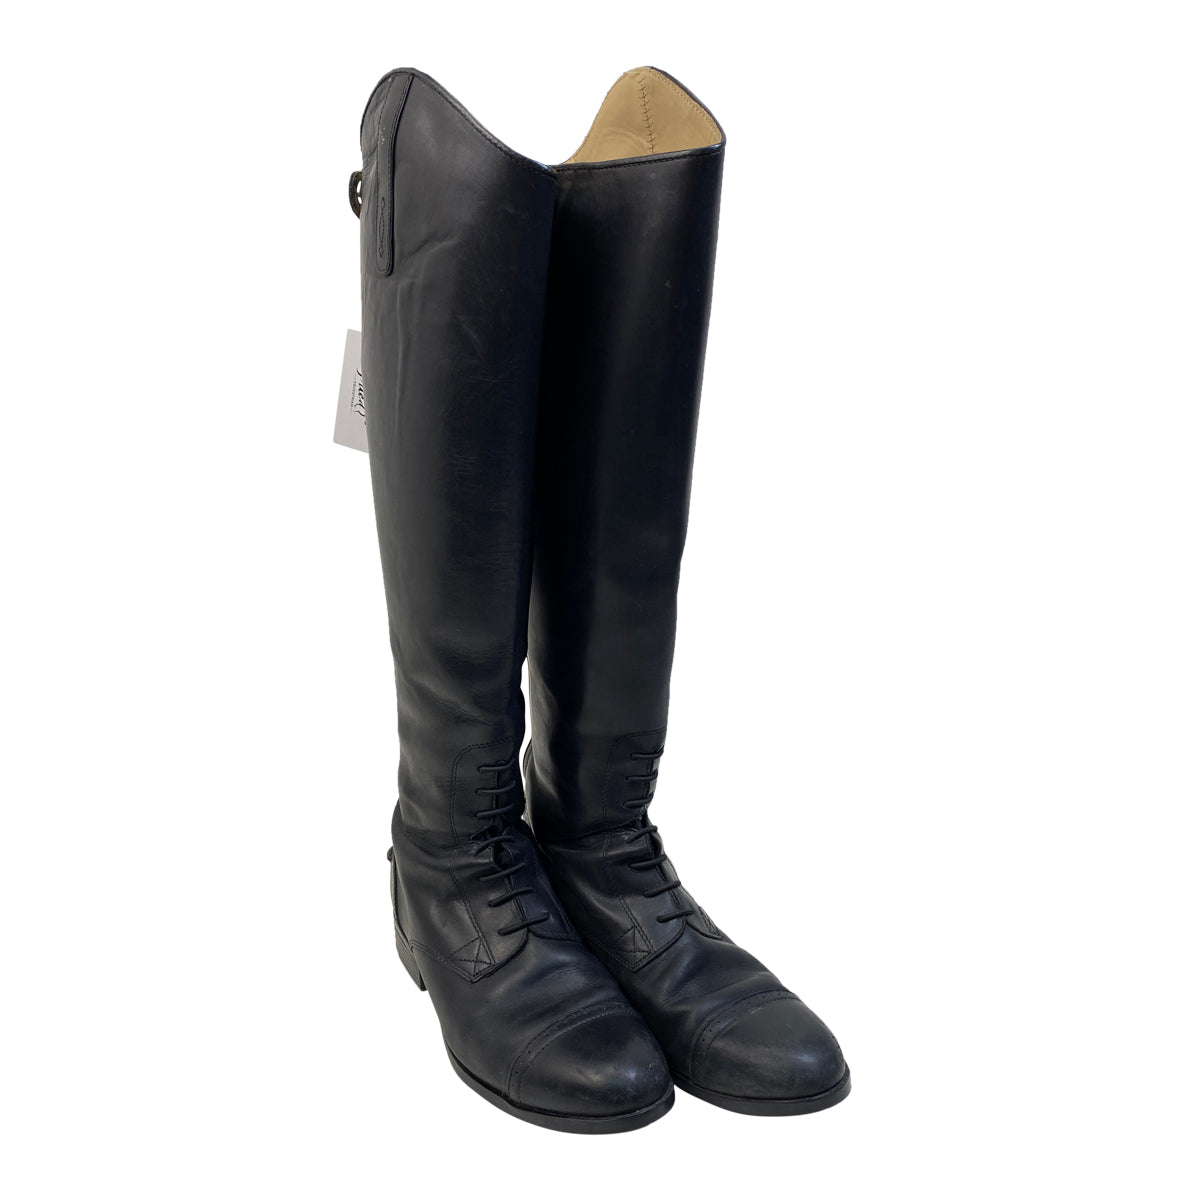 Ariat Riding Boots in Black